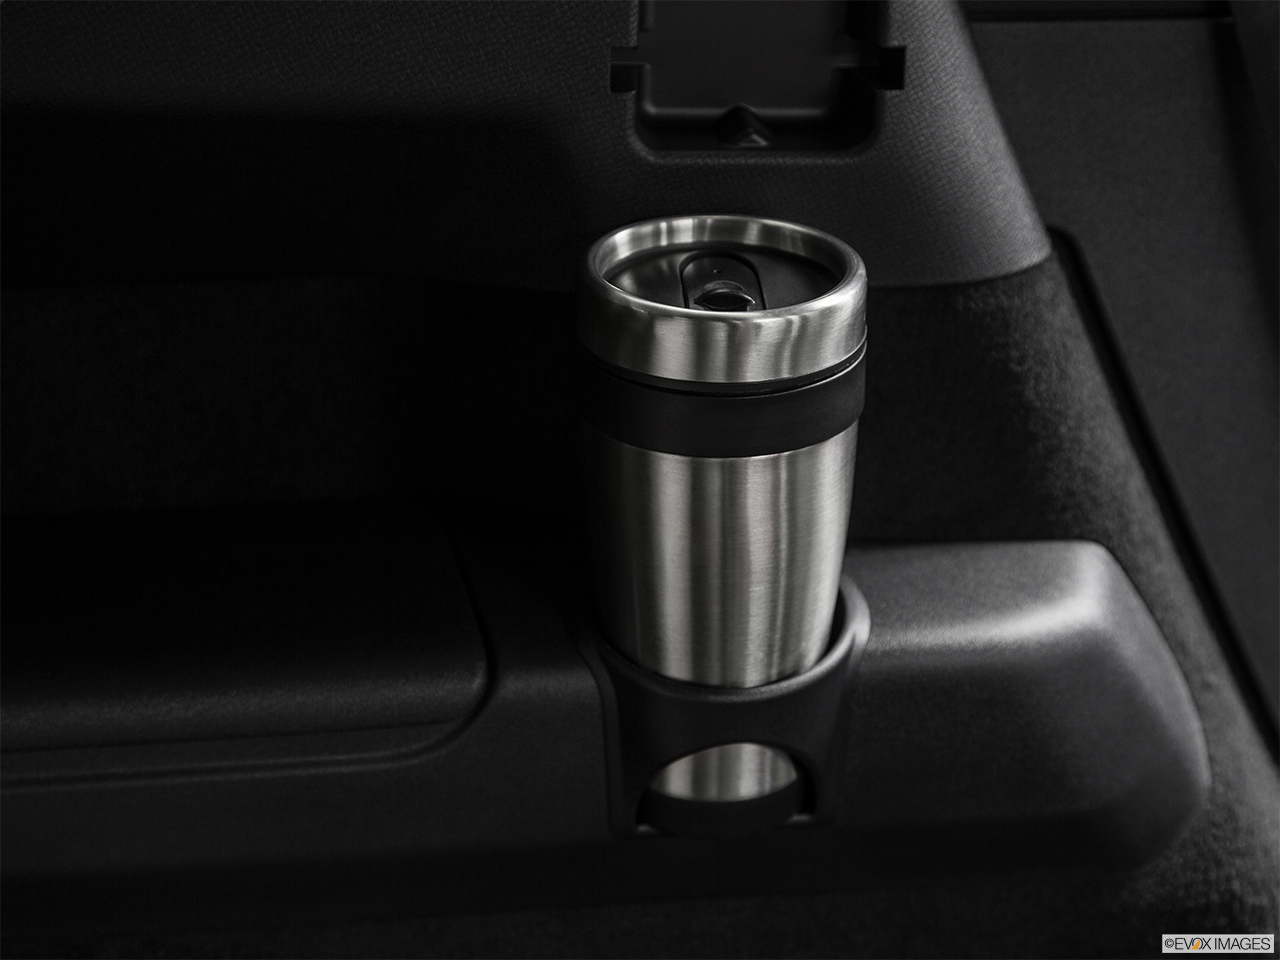 2018 Volvo XC90 T6 Momentum Third Row side cup holder with coffee prop. 